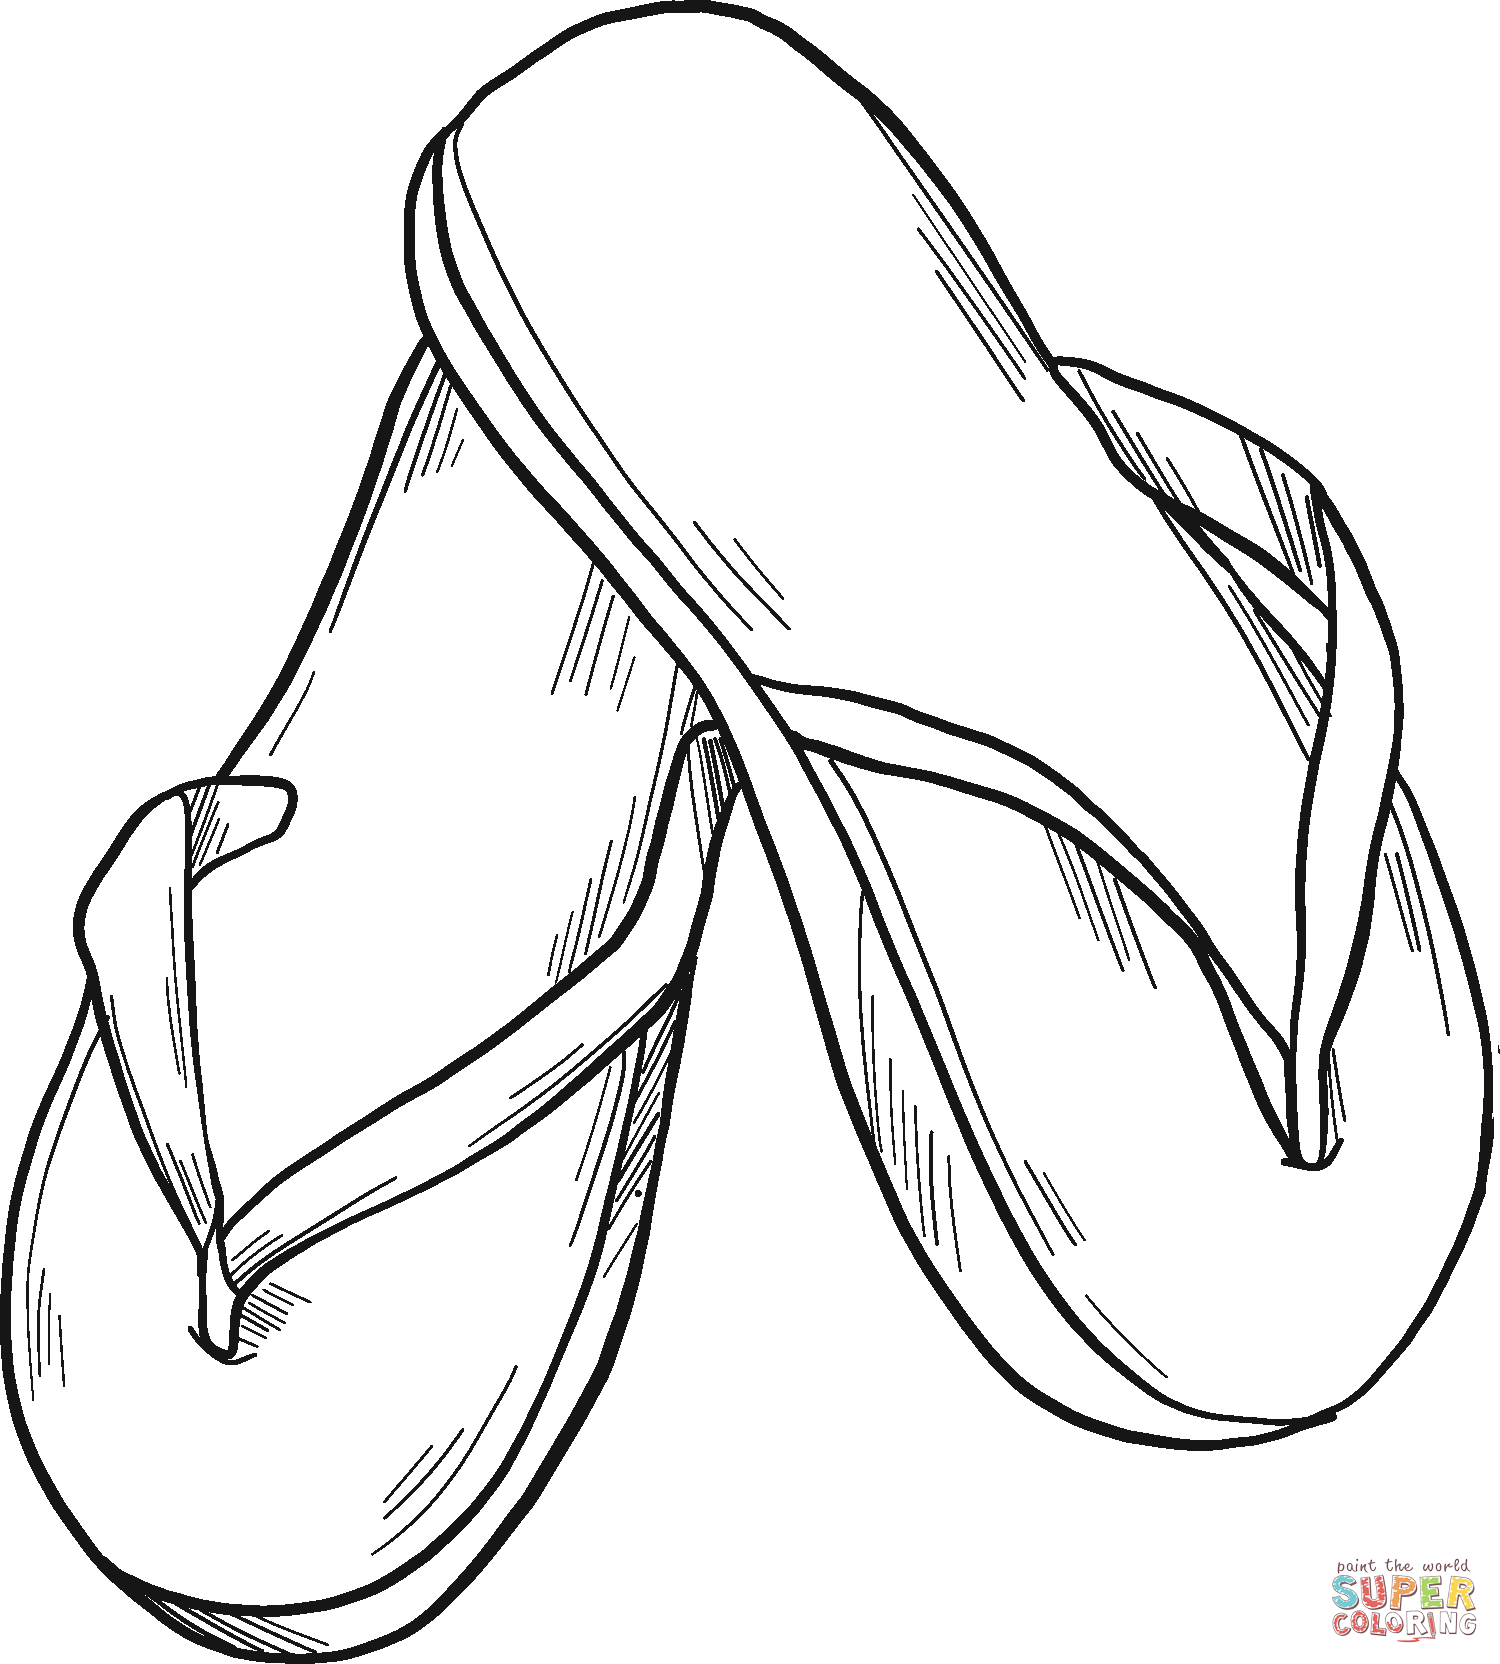 Flip-Flops coloring page | Free Printable Coloring Pages